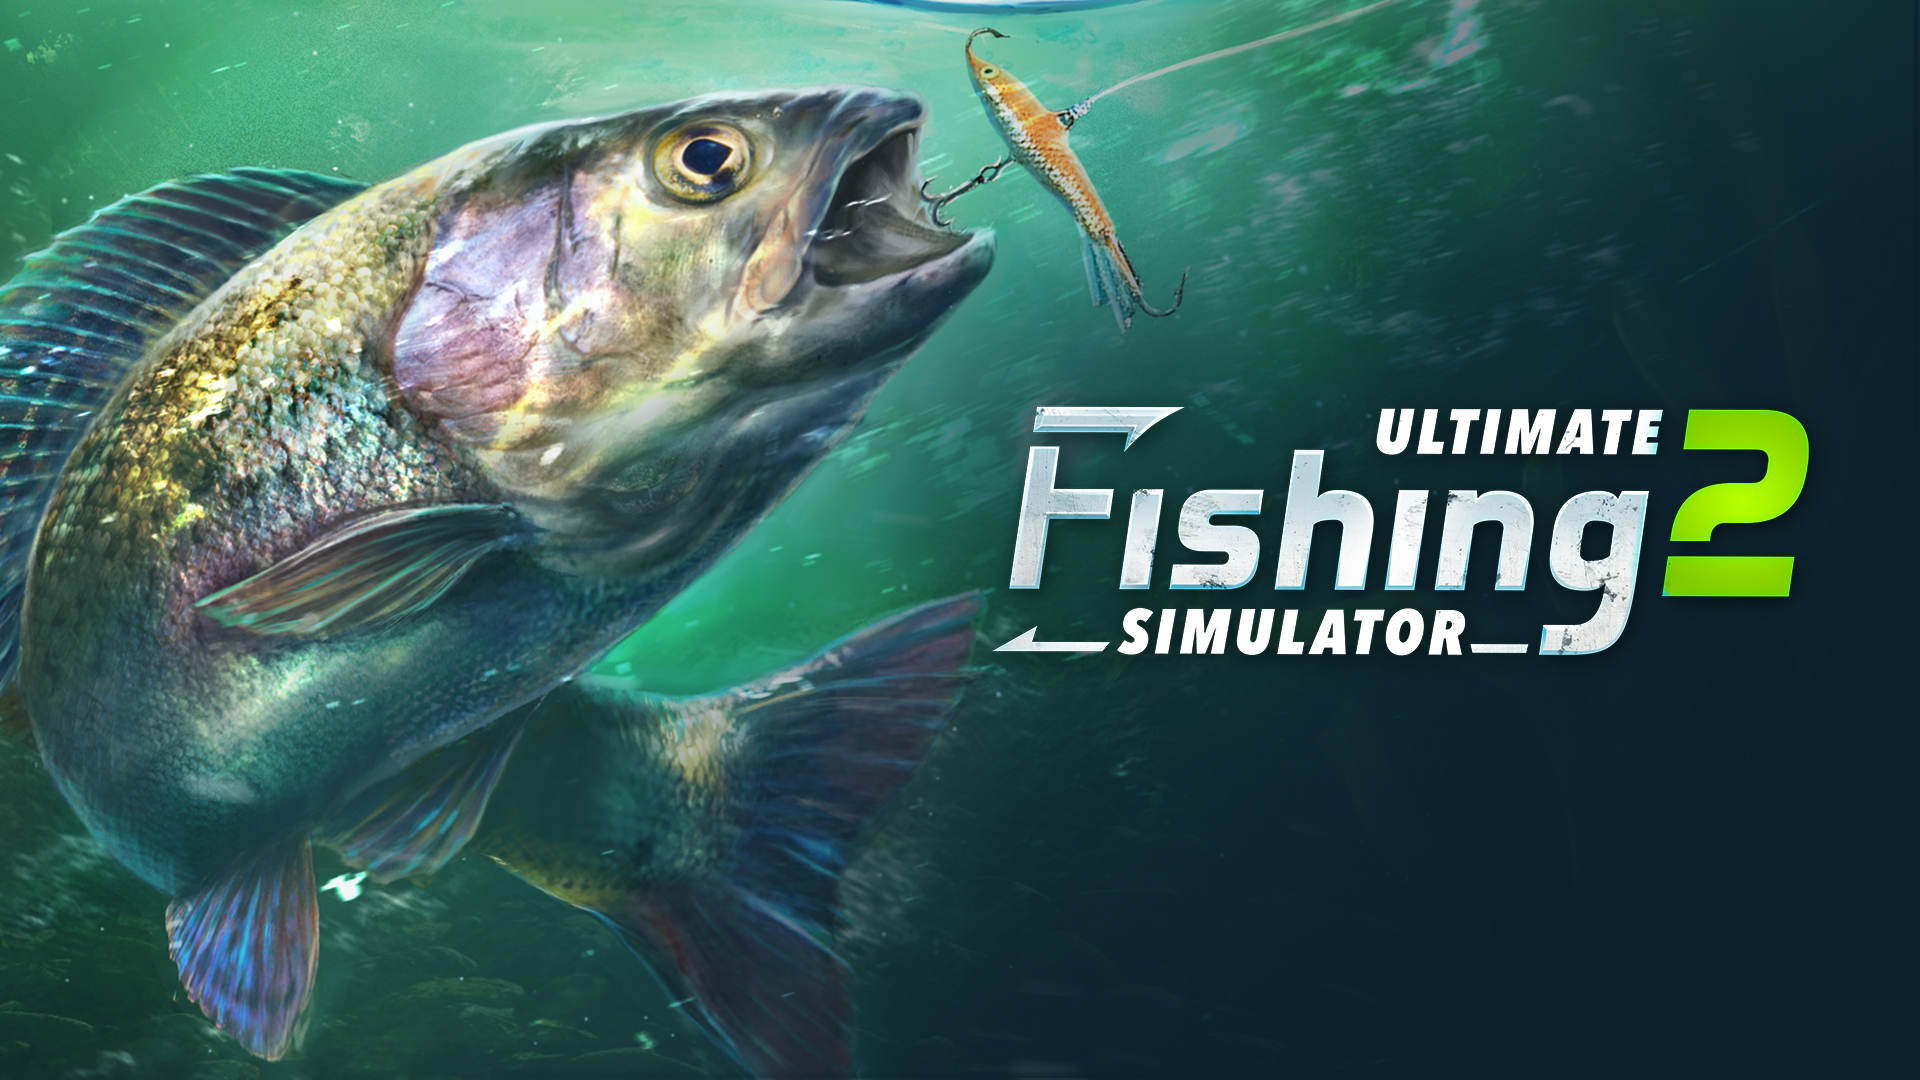 Entspannt Angeln in Virtual Reality mit dem Ultimate Fishing Simulator 2